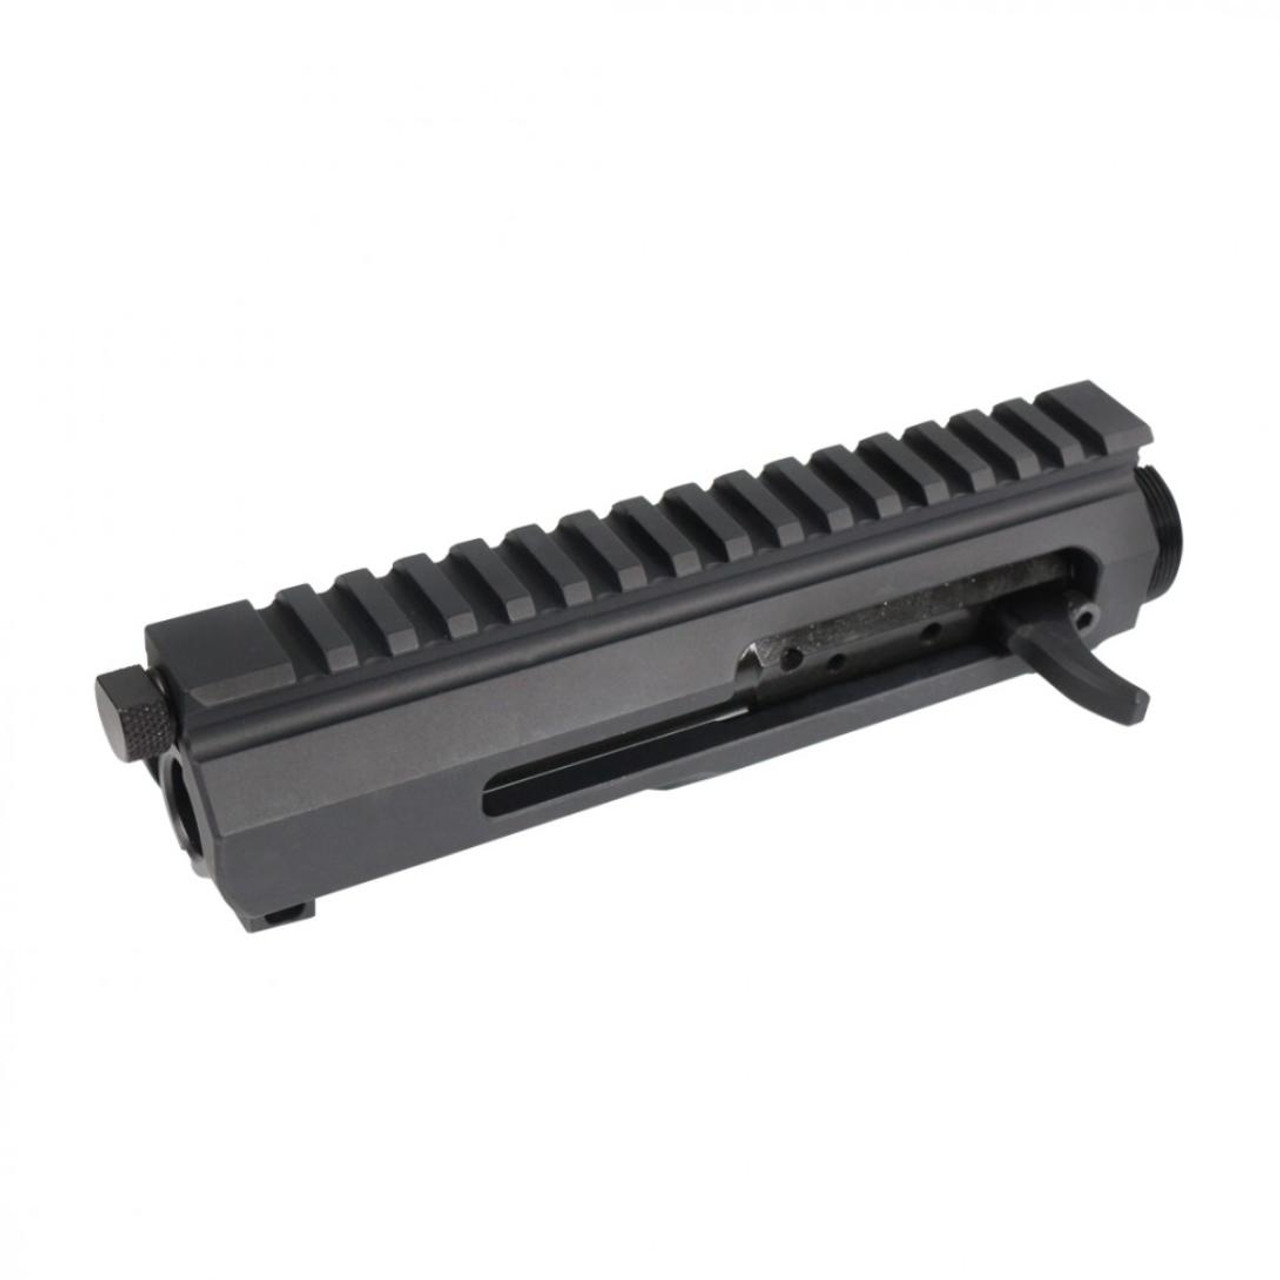 MCS AR-15 Side Charging Billet Upper Receiver & Nitride BCG Made in the USA 